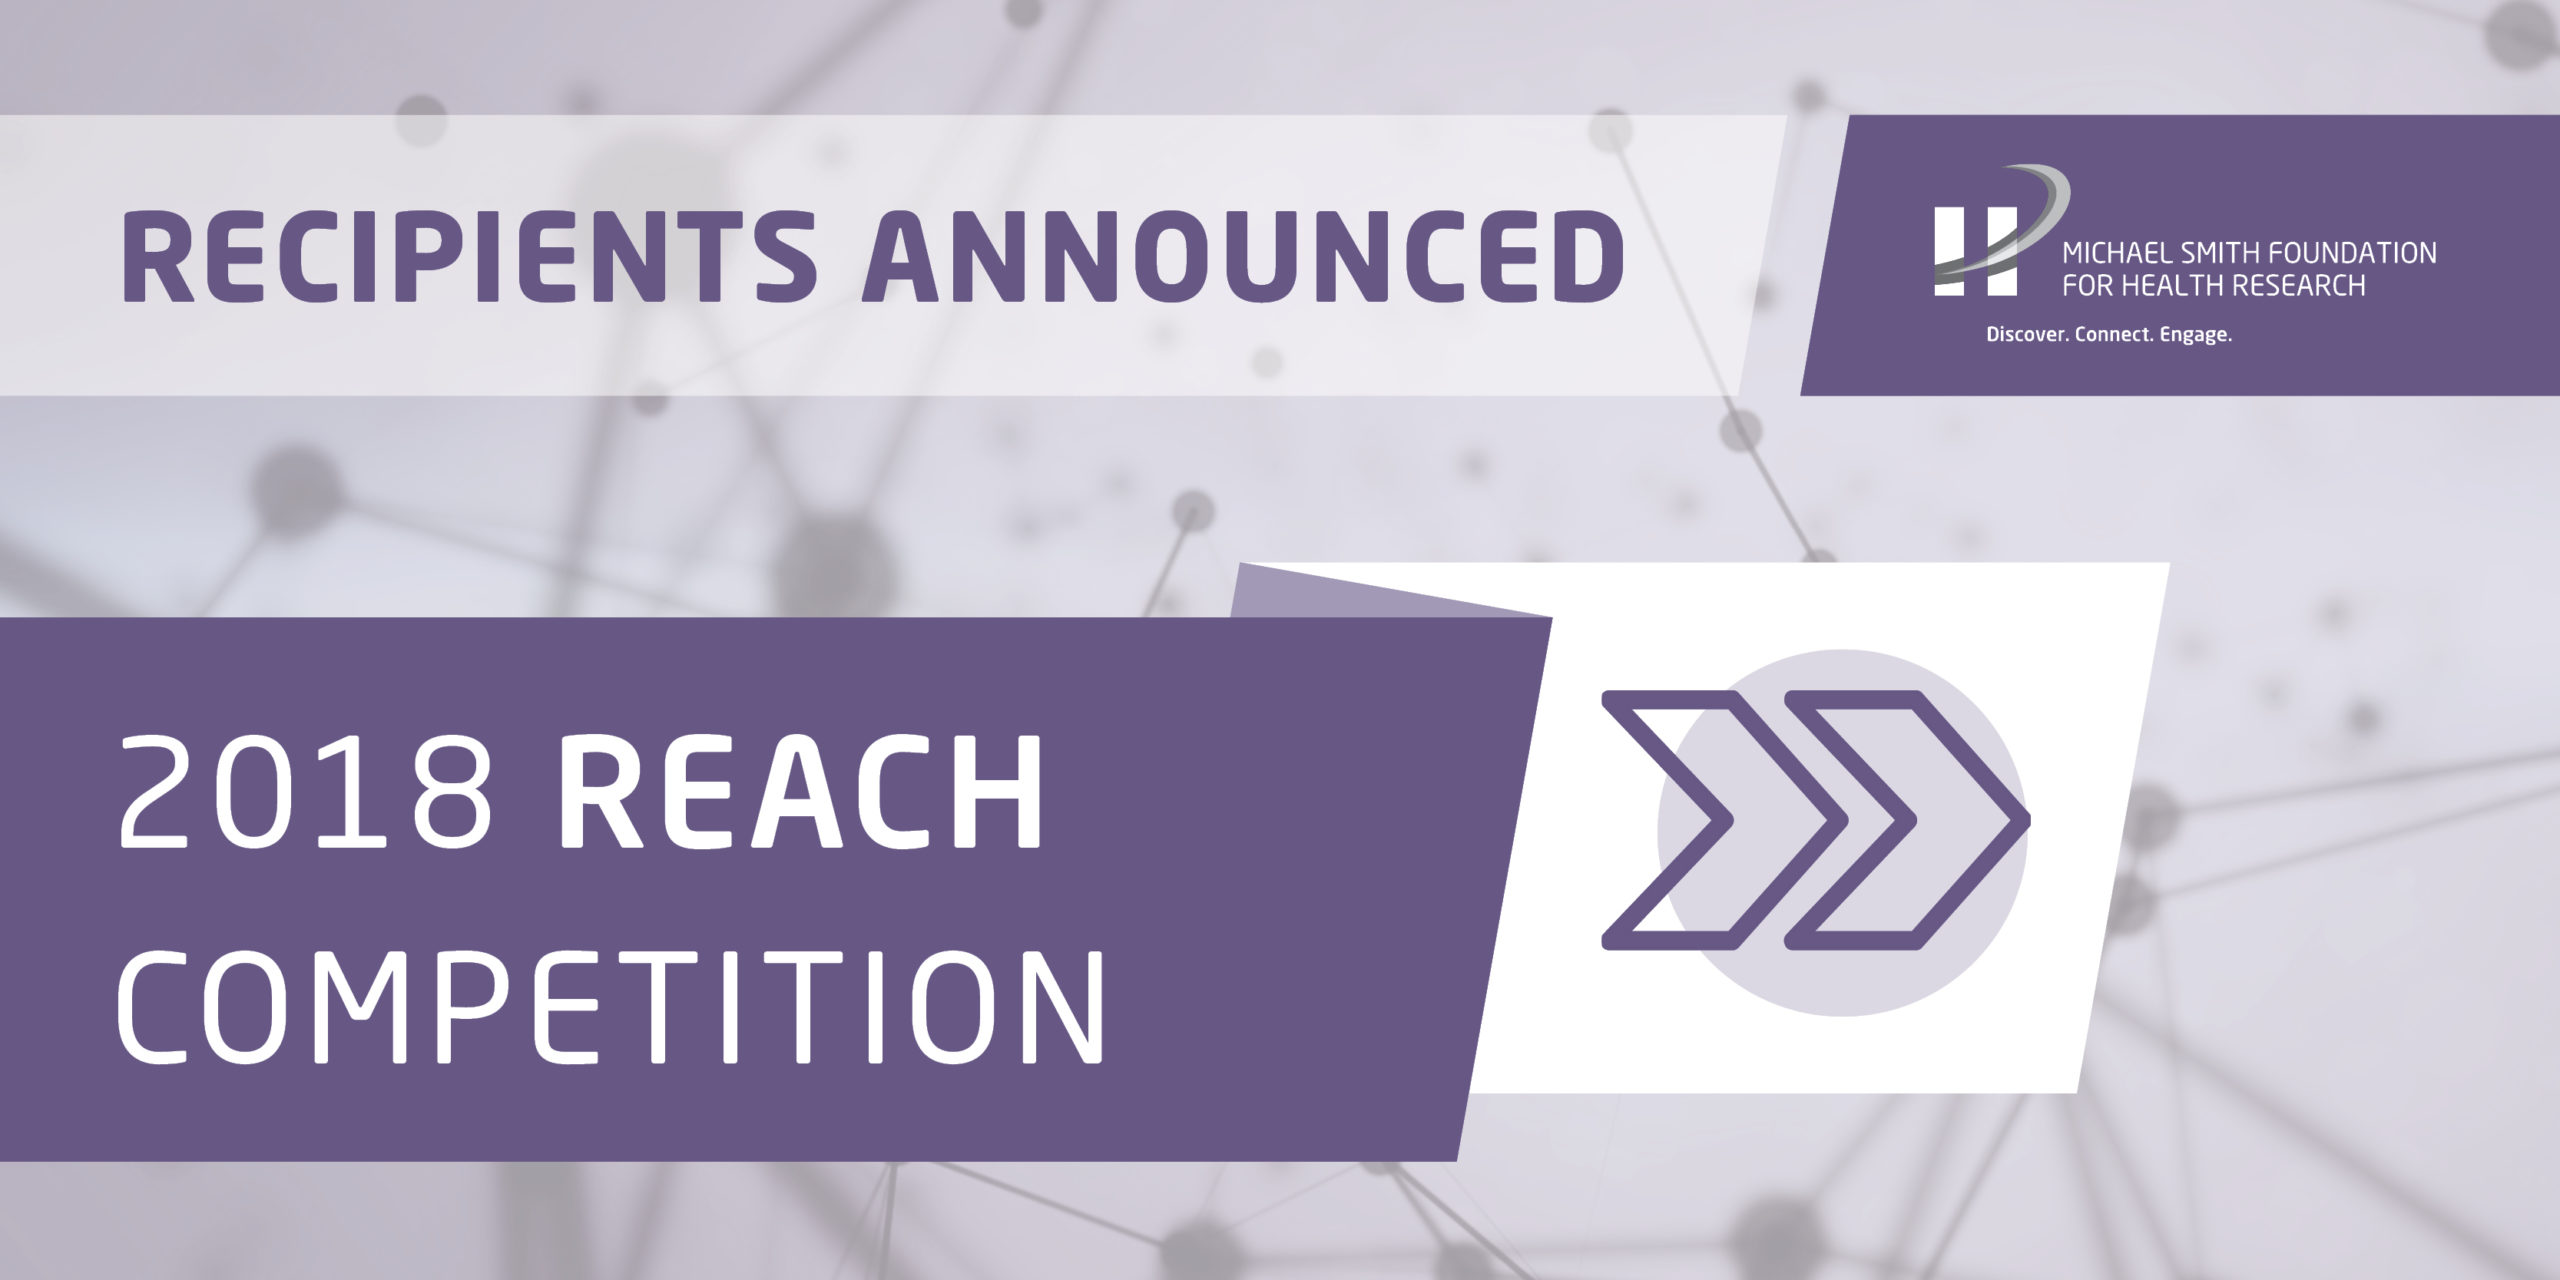 Furthering the use of research evidence: 18 teams funded in 2018 Reach competition